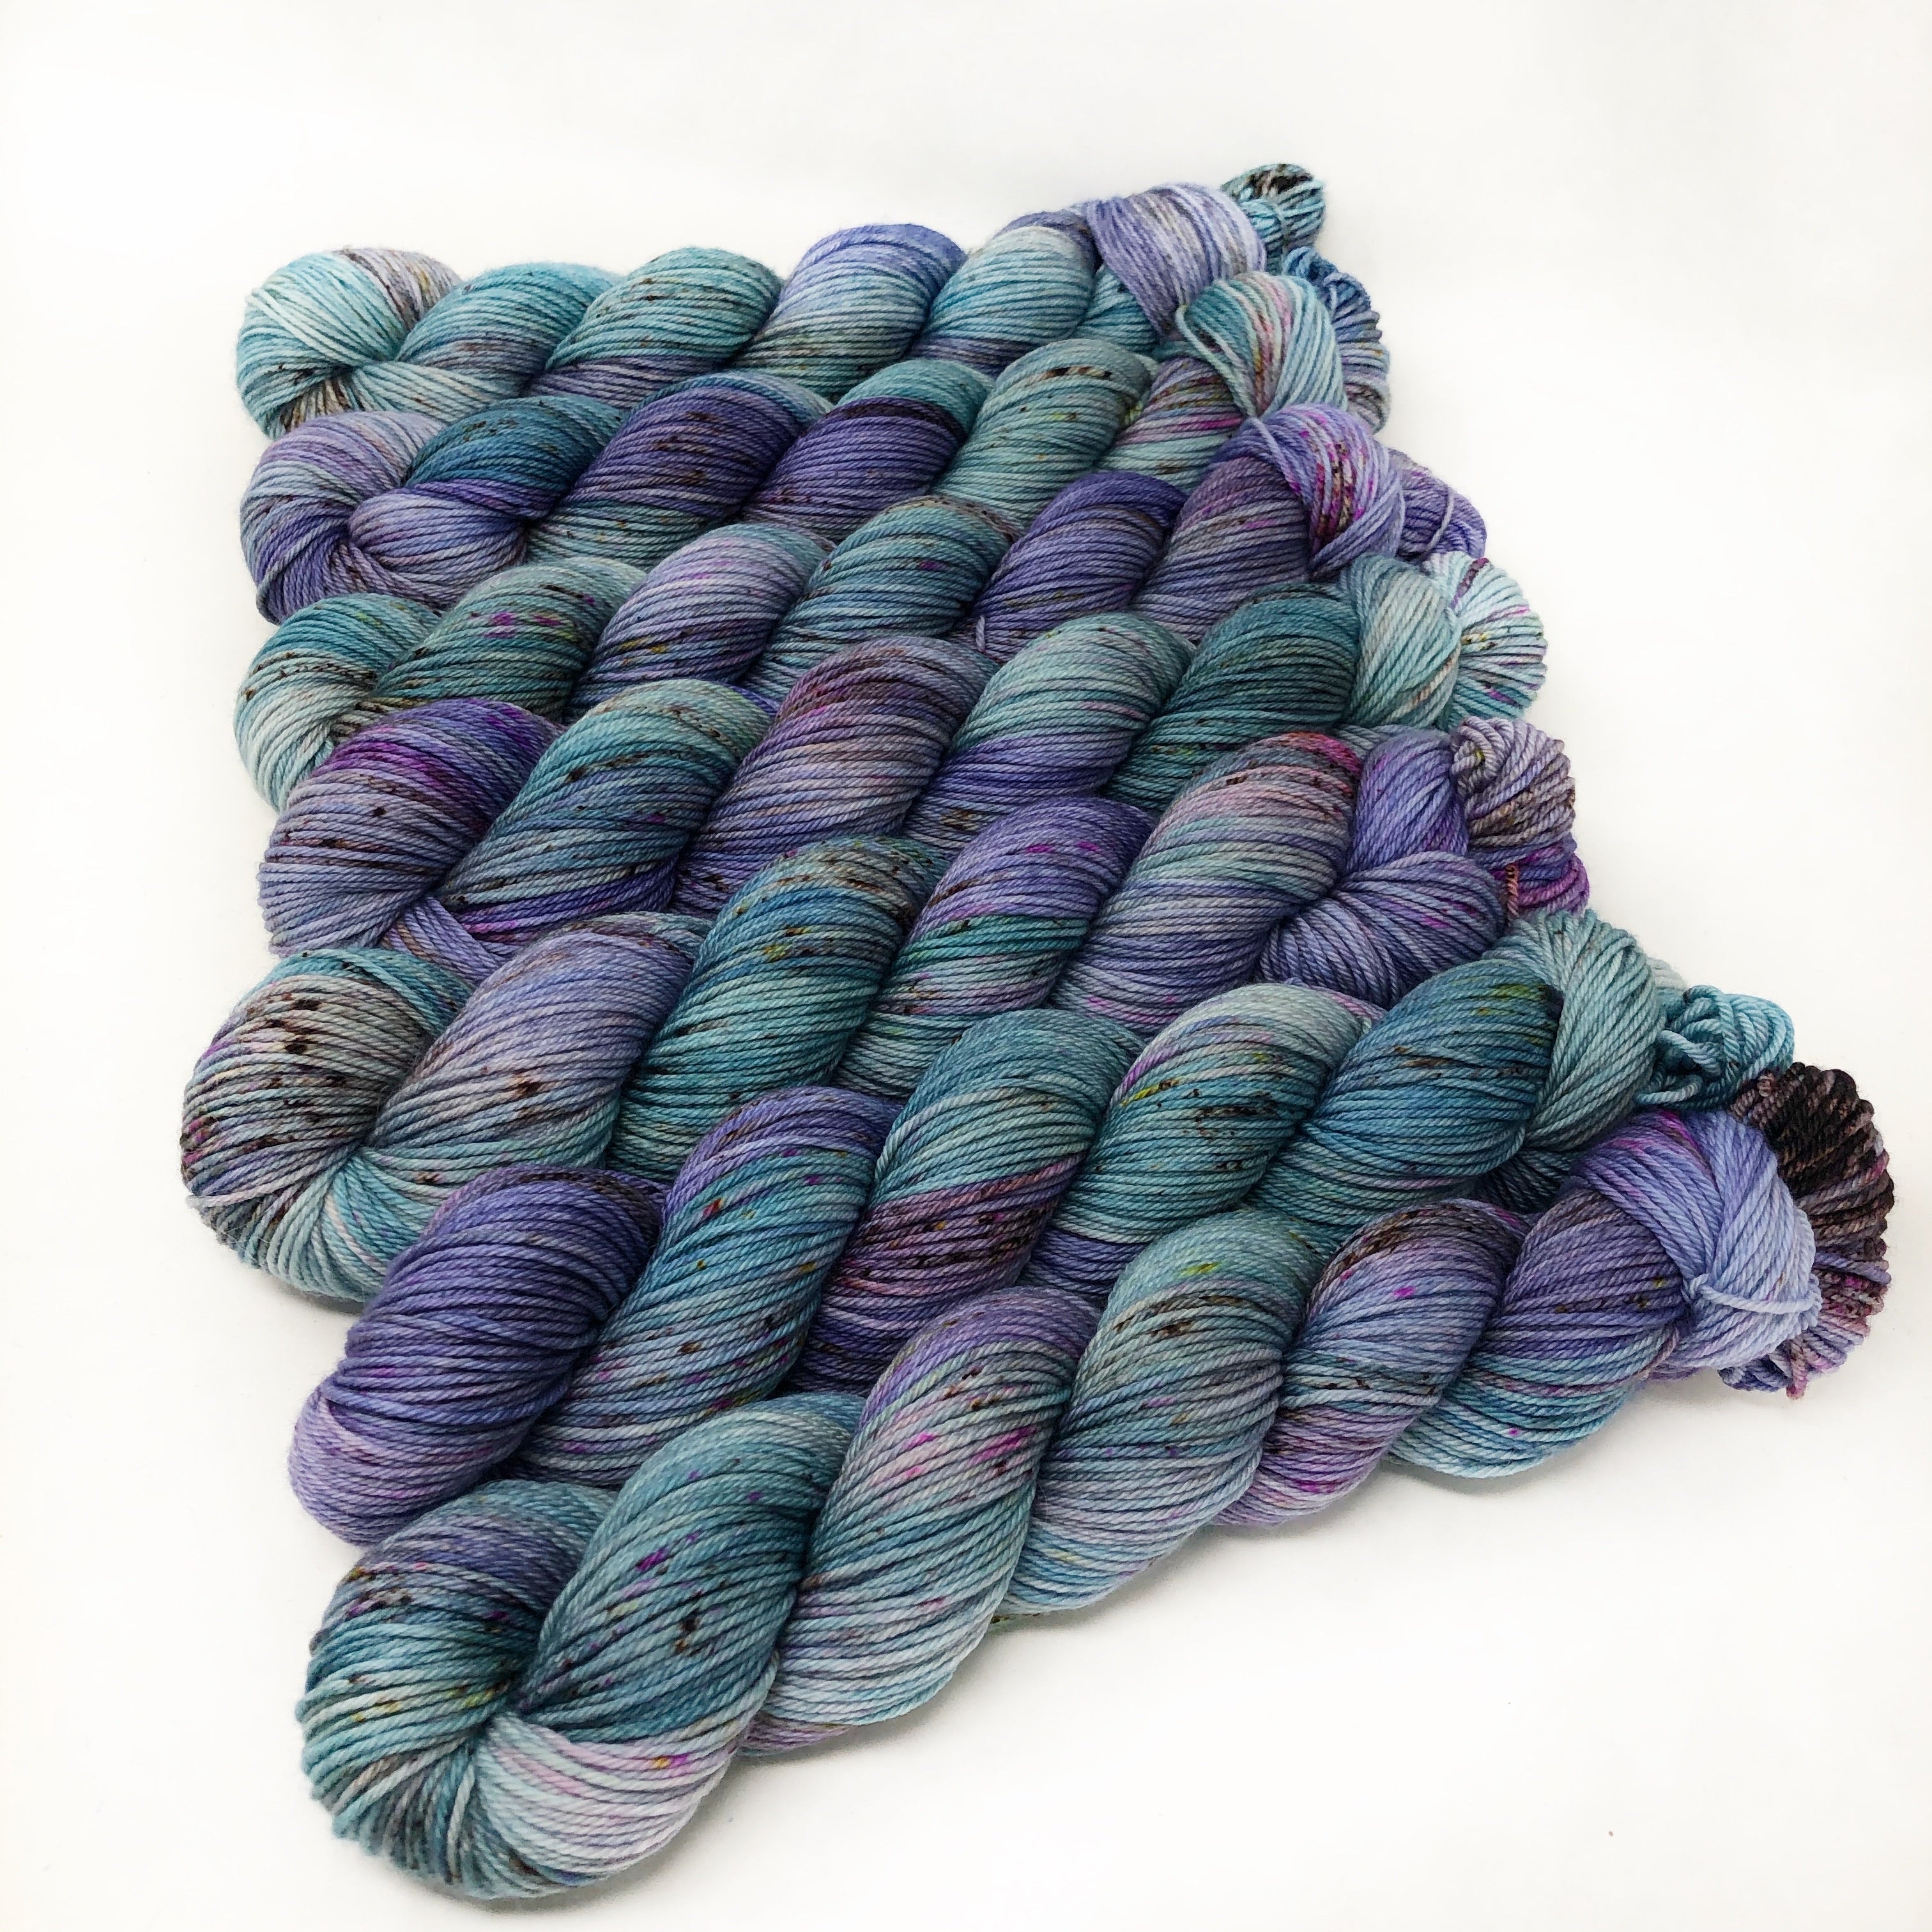 Nymph - Delightful dk - the perfect sweater yarn